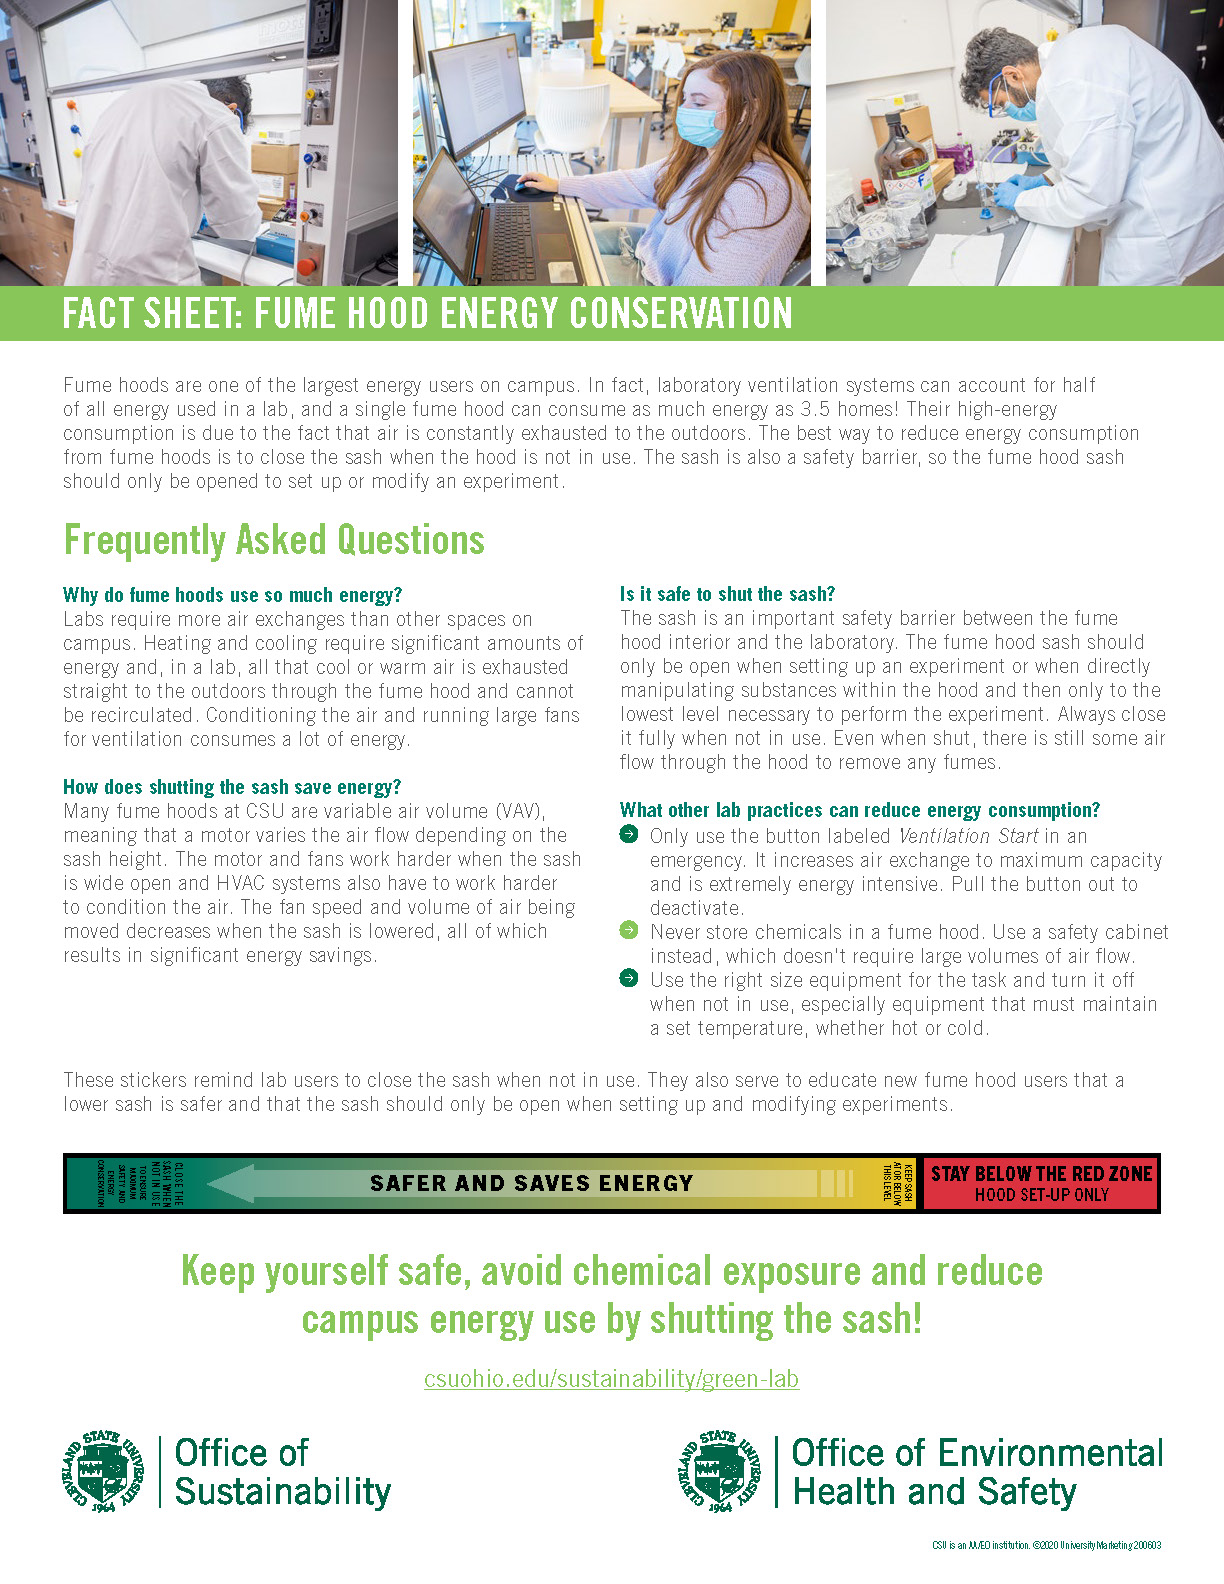 Shut the Sash - Fume Hoods and Energy Conservation Fact Sheet